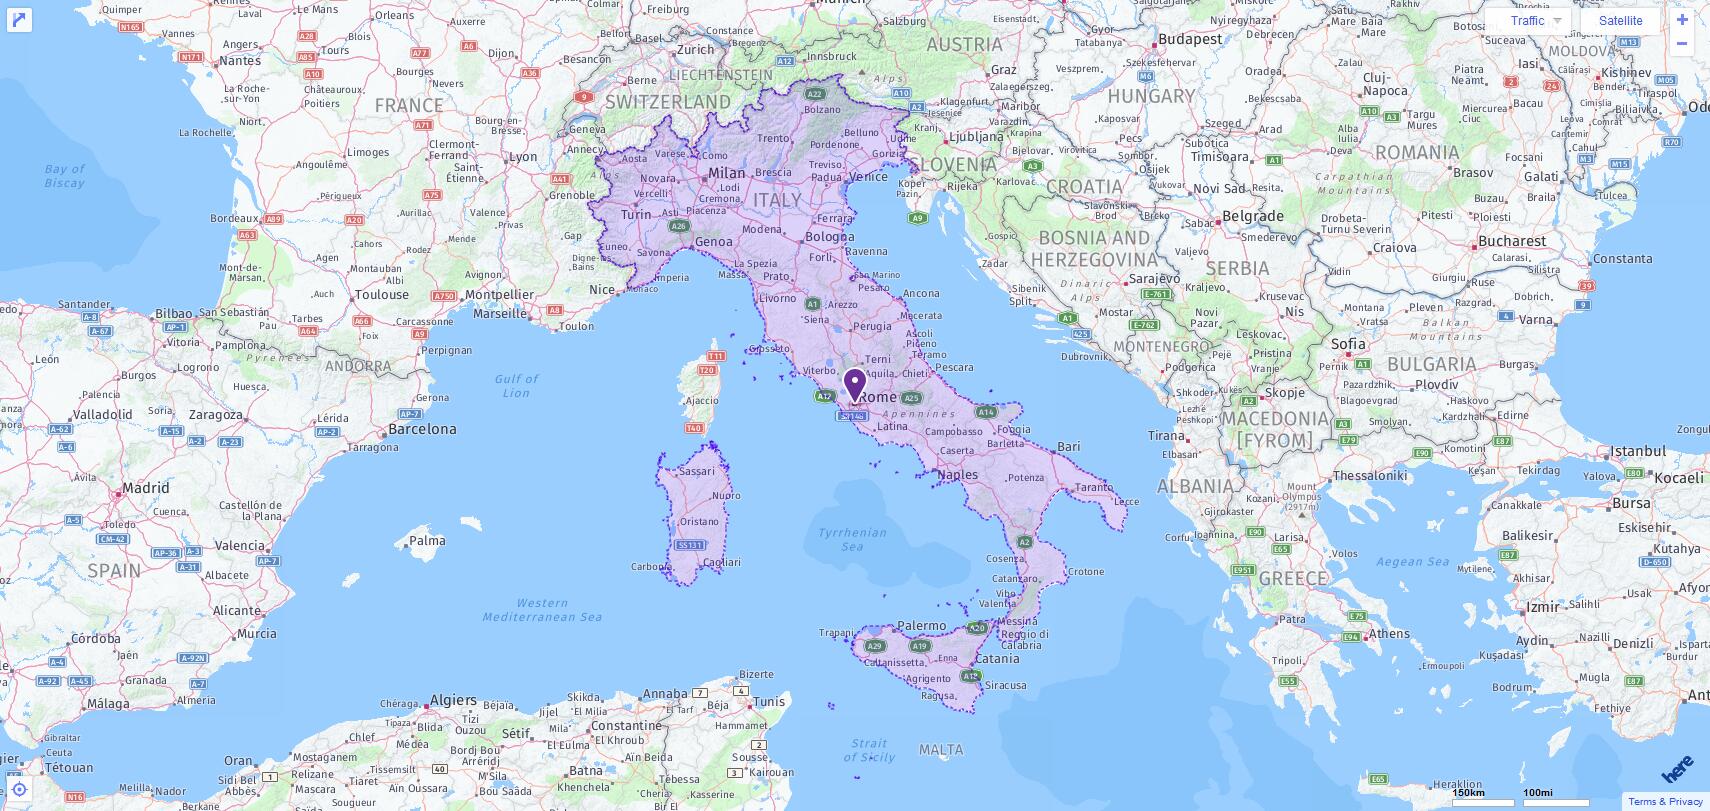 ACT Test Centers and Dates in Italy